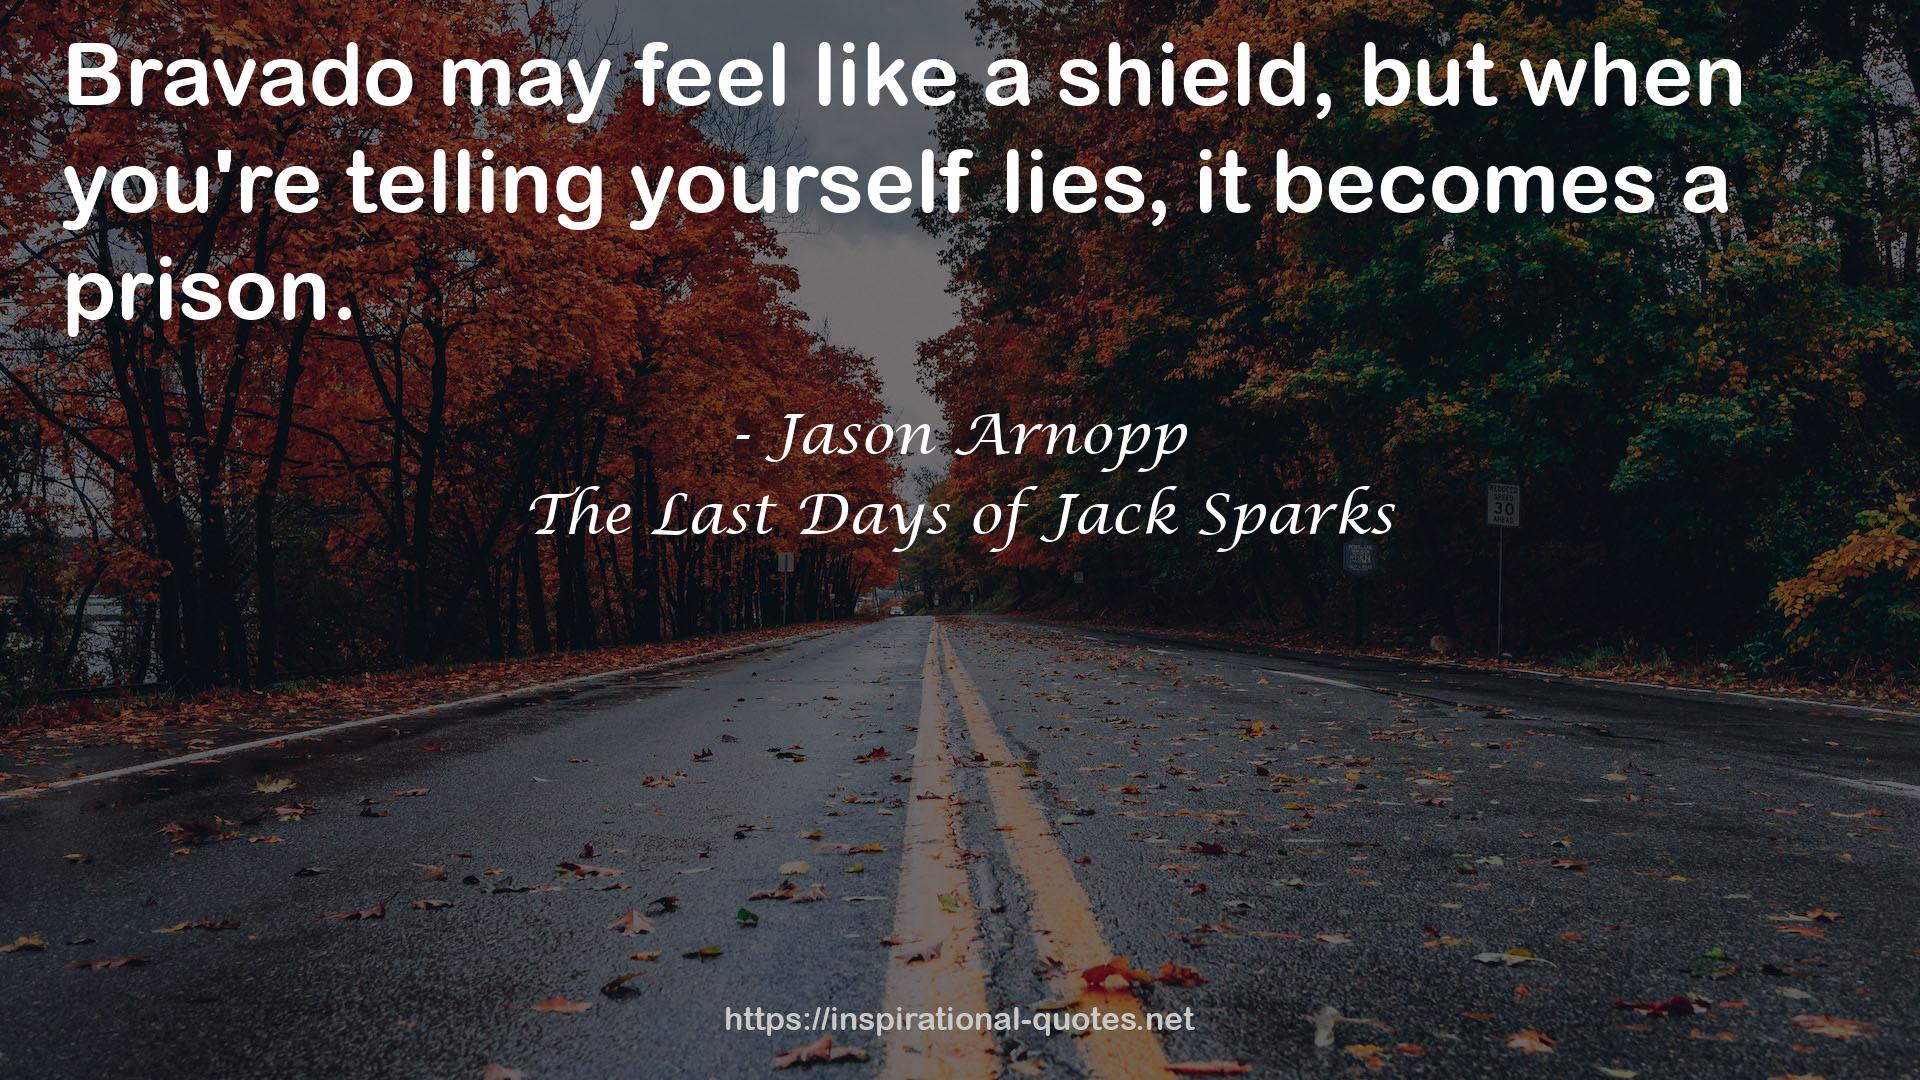 The Last Days of Jack Sparks QUOTES